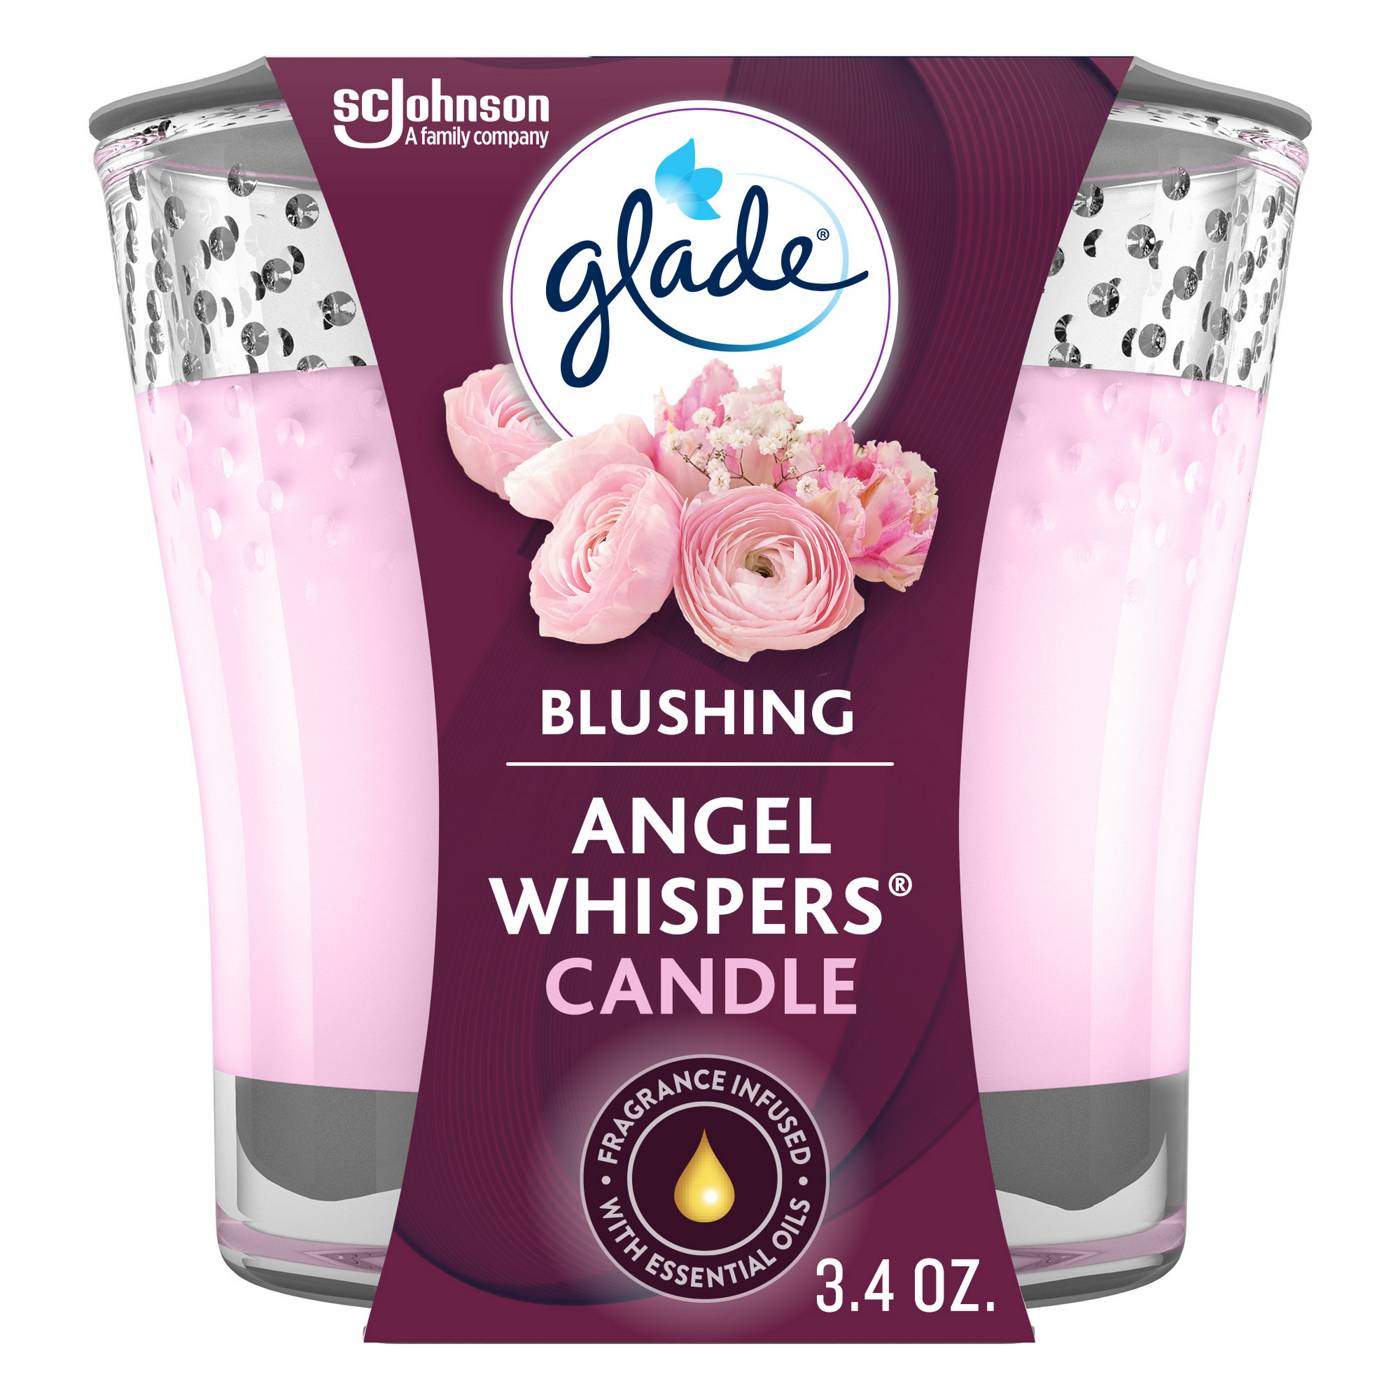 Glade Angel Whispers Candle; image 1 of 2